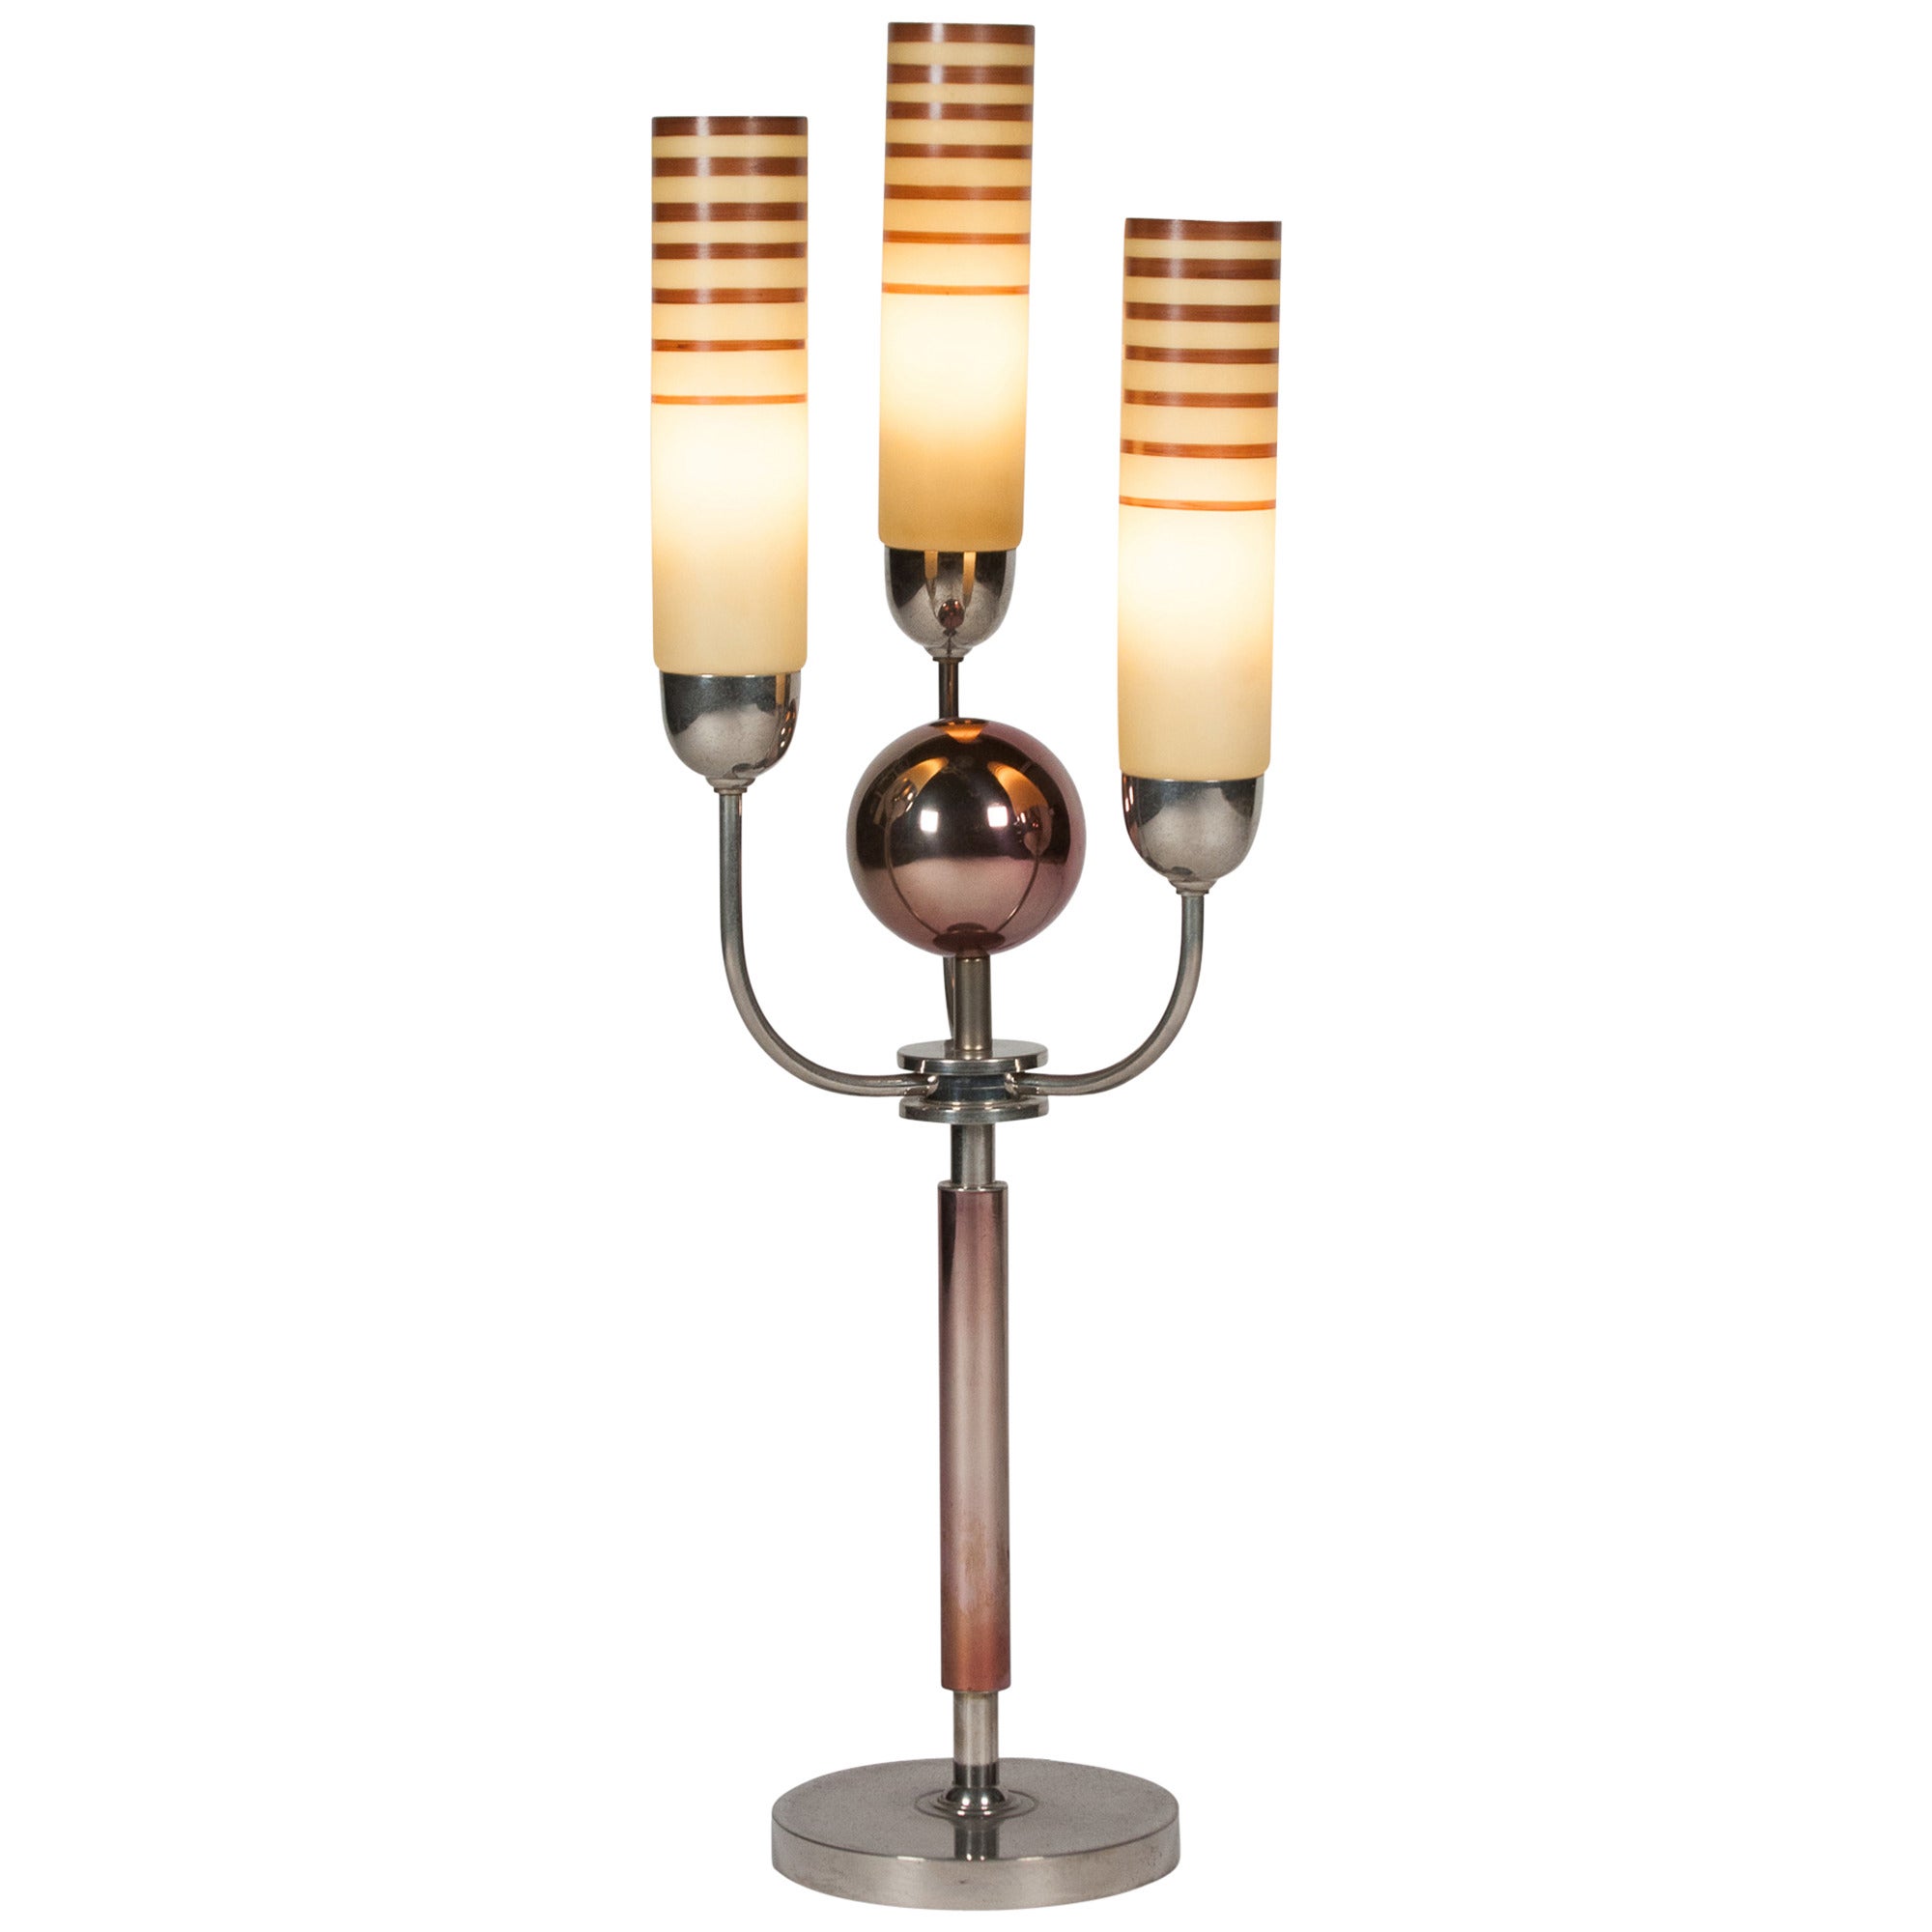 Single Copper and Chrome Lamp by Fritz Breuhaus, German, 1930 For Sale